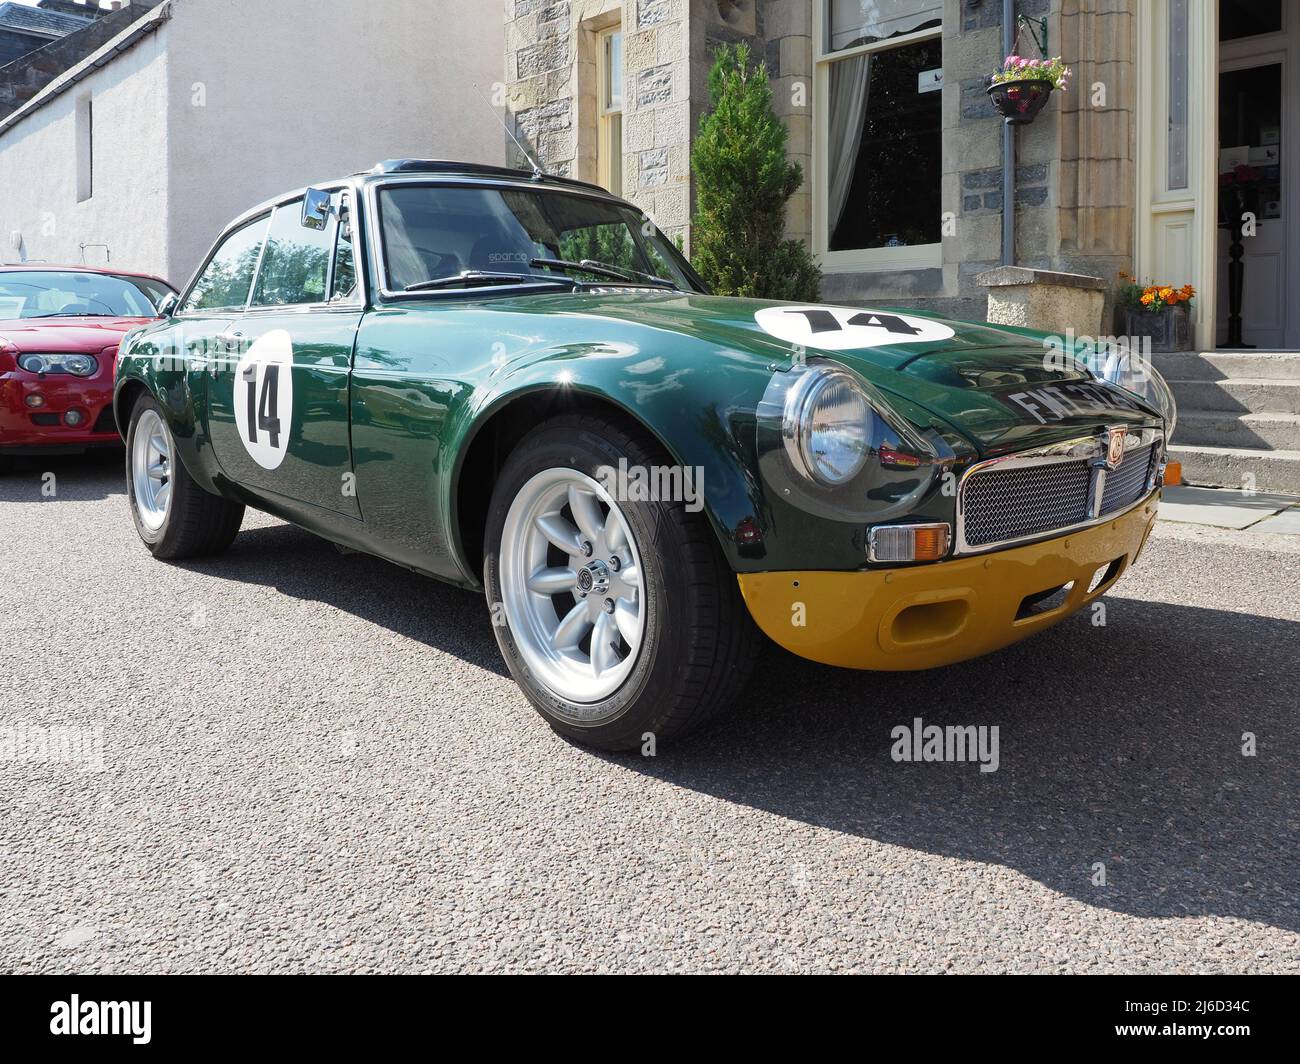 MG MGB GT, 1.8lt, made in 1970, in British Racing Green with a yellow chin spoiler. This one is used in racing. Stock Photo